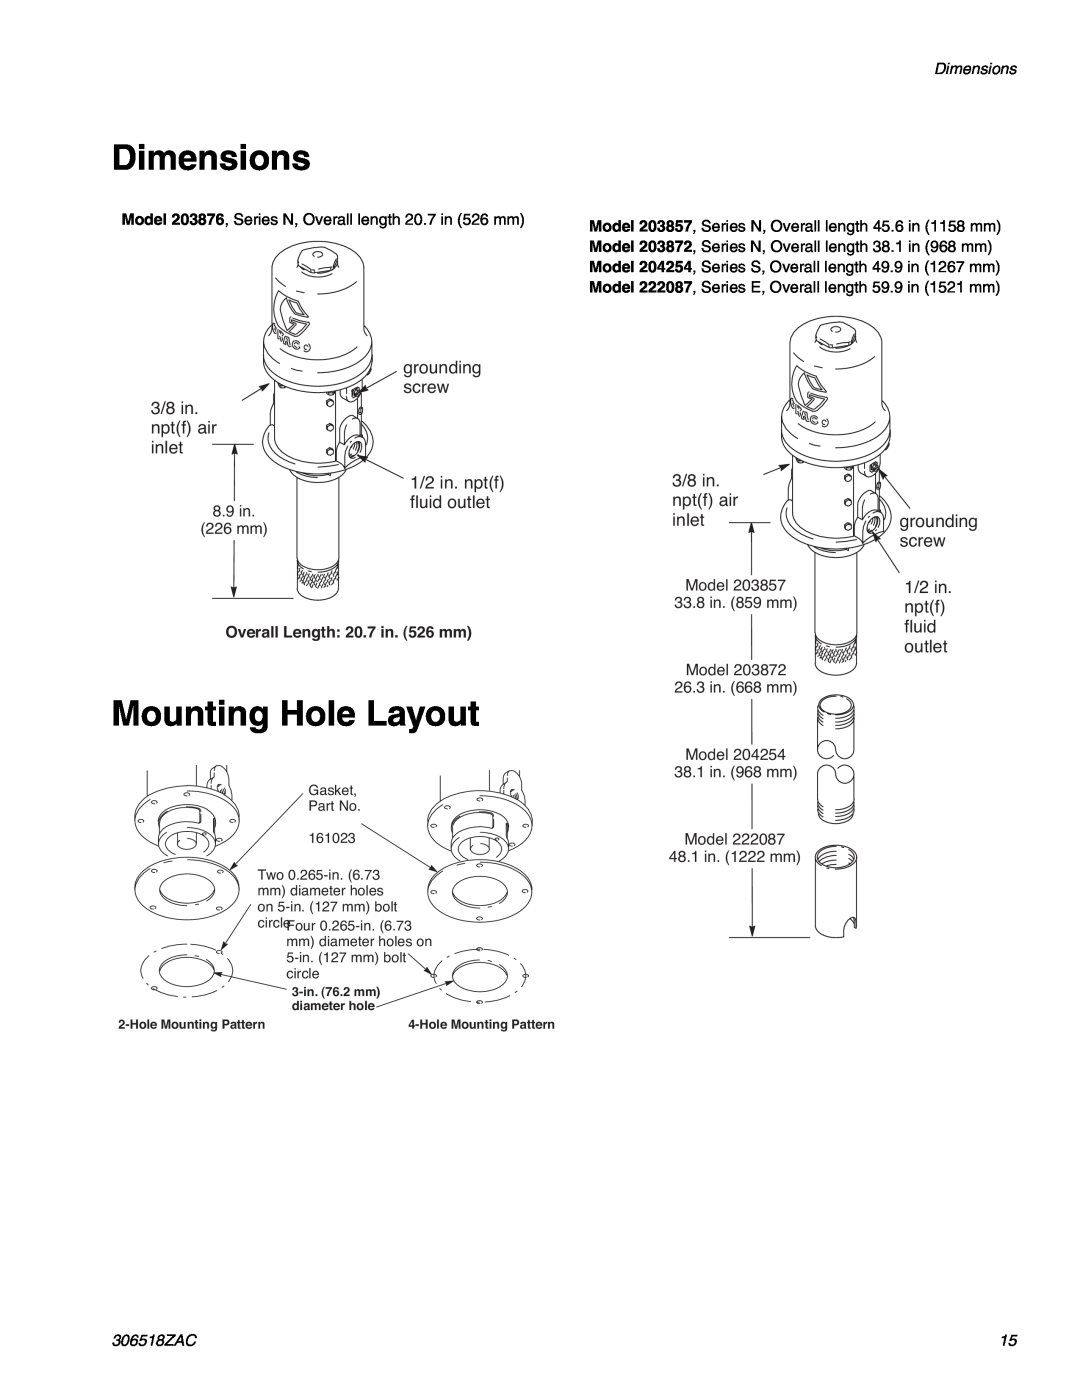 Graco 306518ZAC Dimensions, Mounting Hole Layout, 3/8 in. nptf air inlet, grounding screw 1/2 in. nptf fluid outlet 